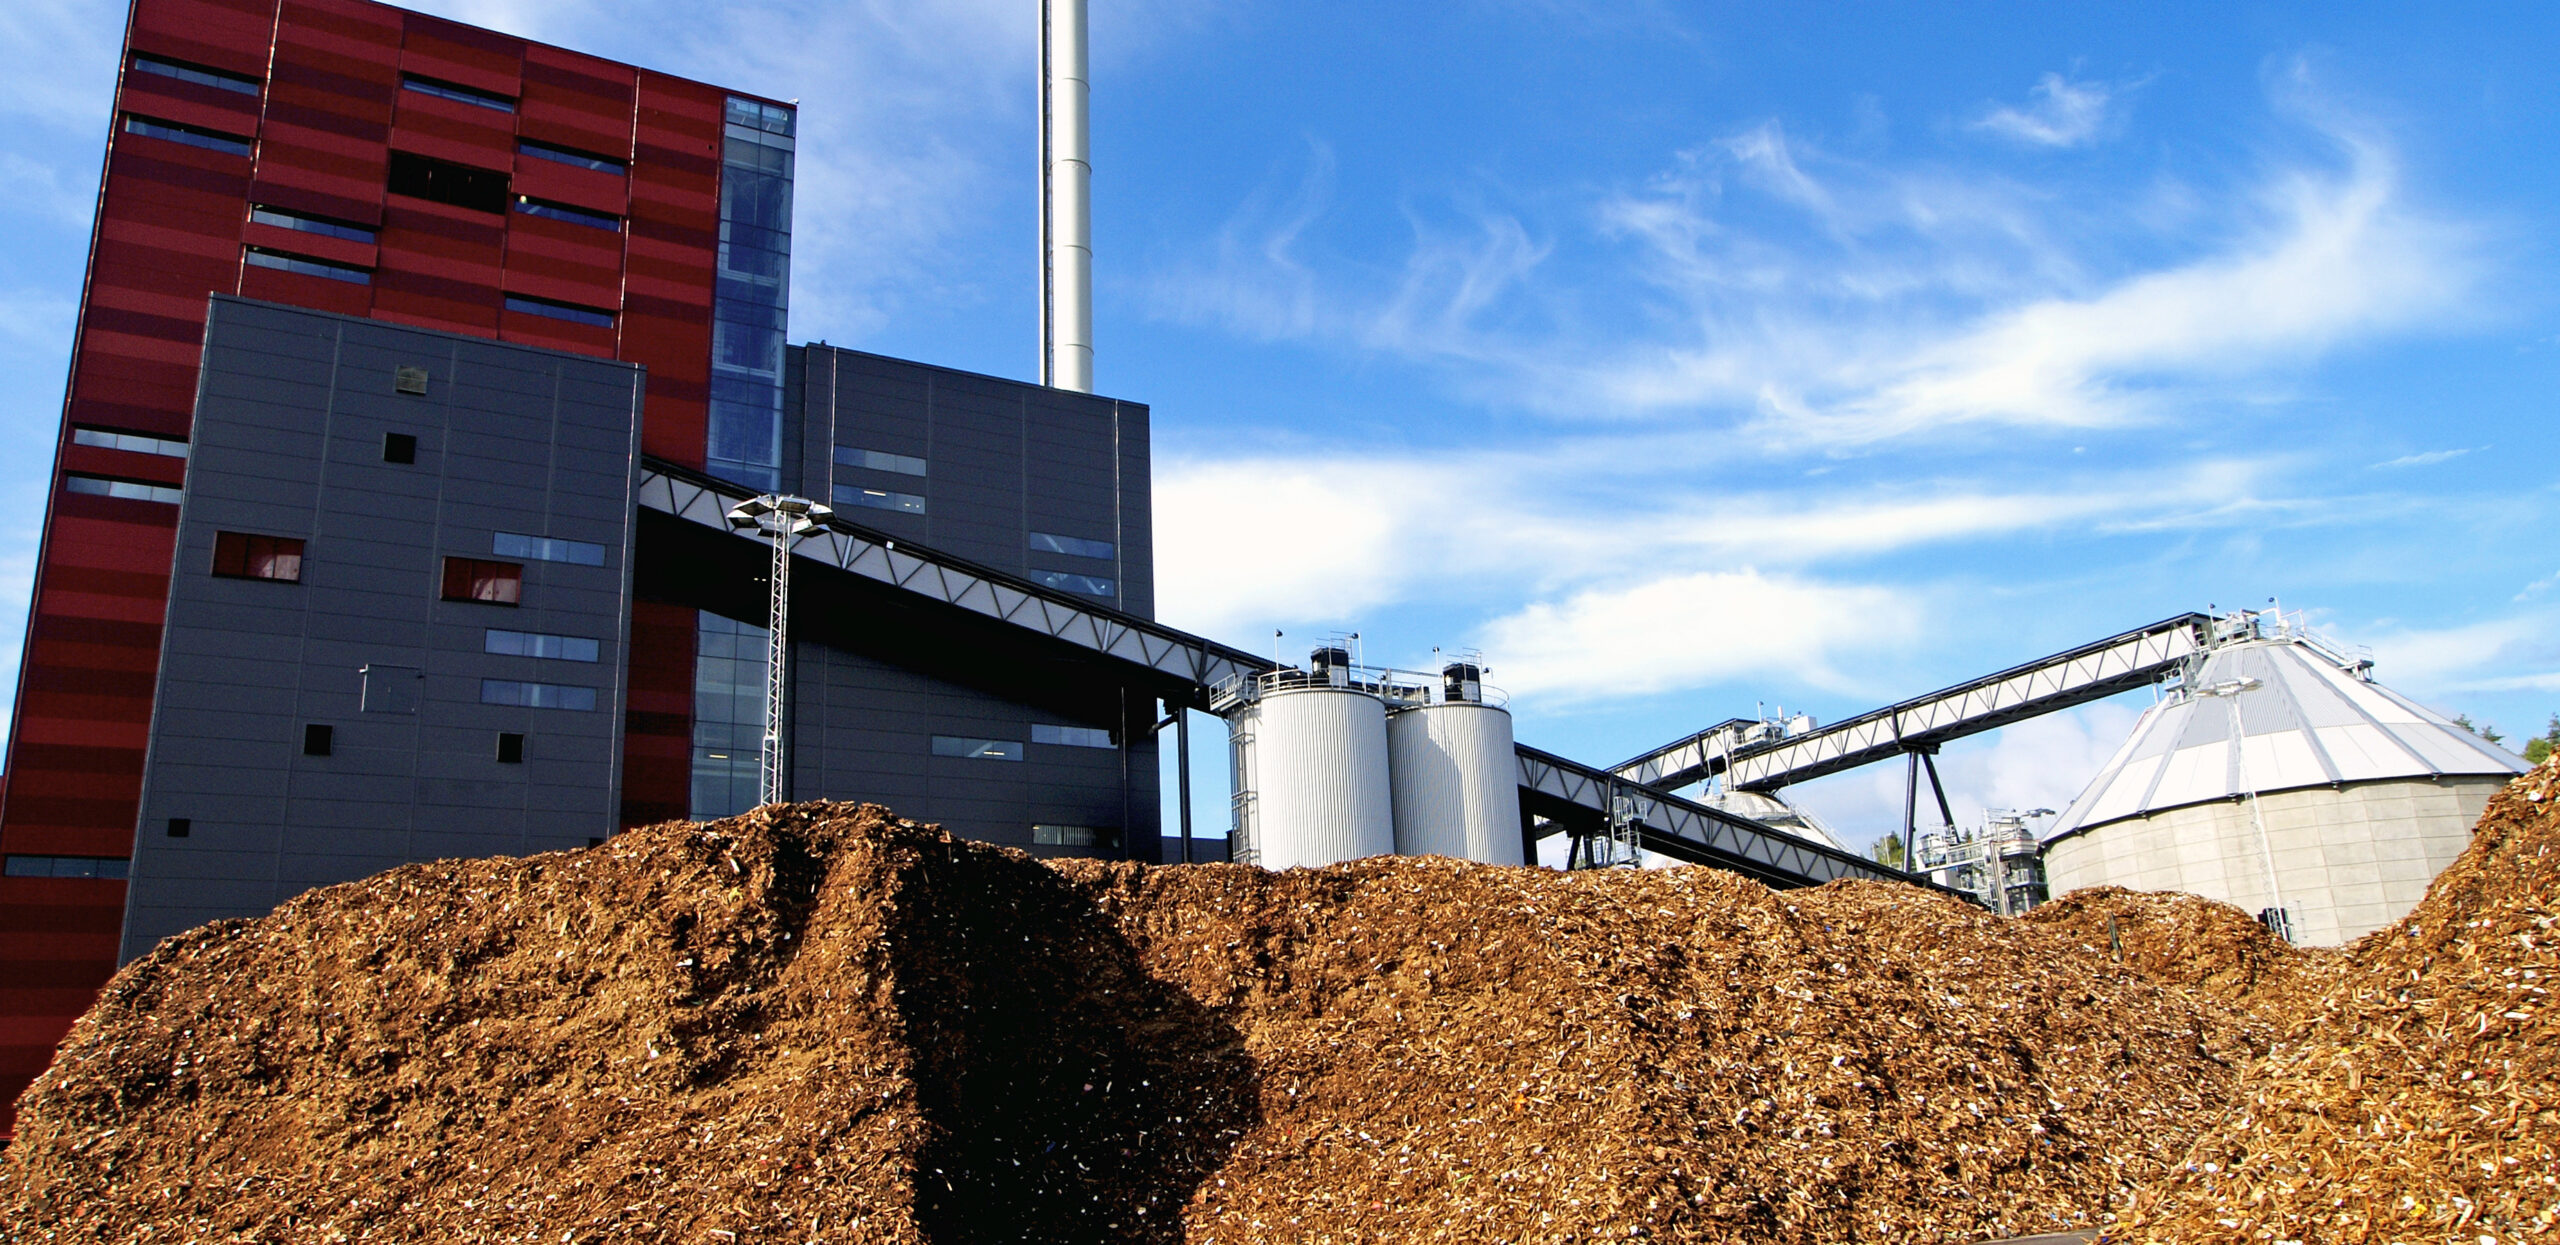 Waste-to-energy plant with storage of wooden fuel.